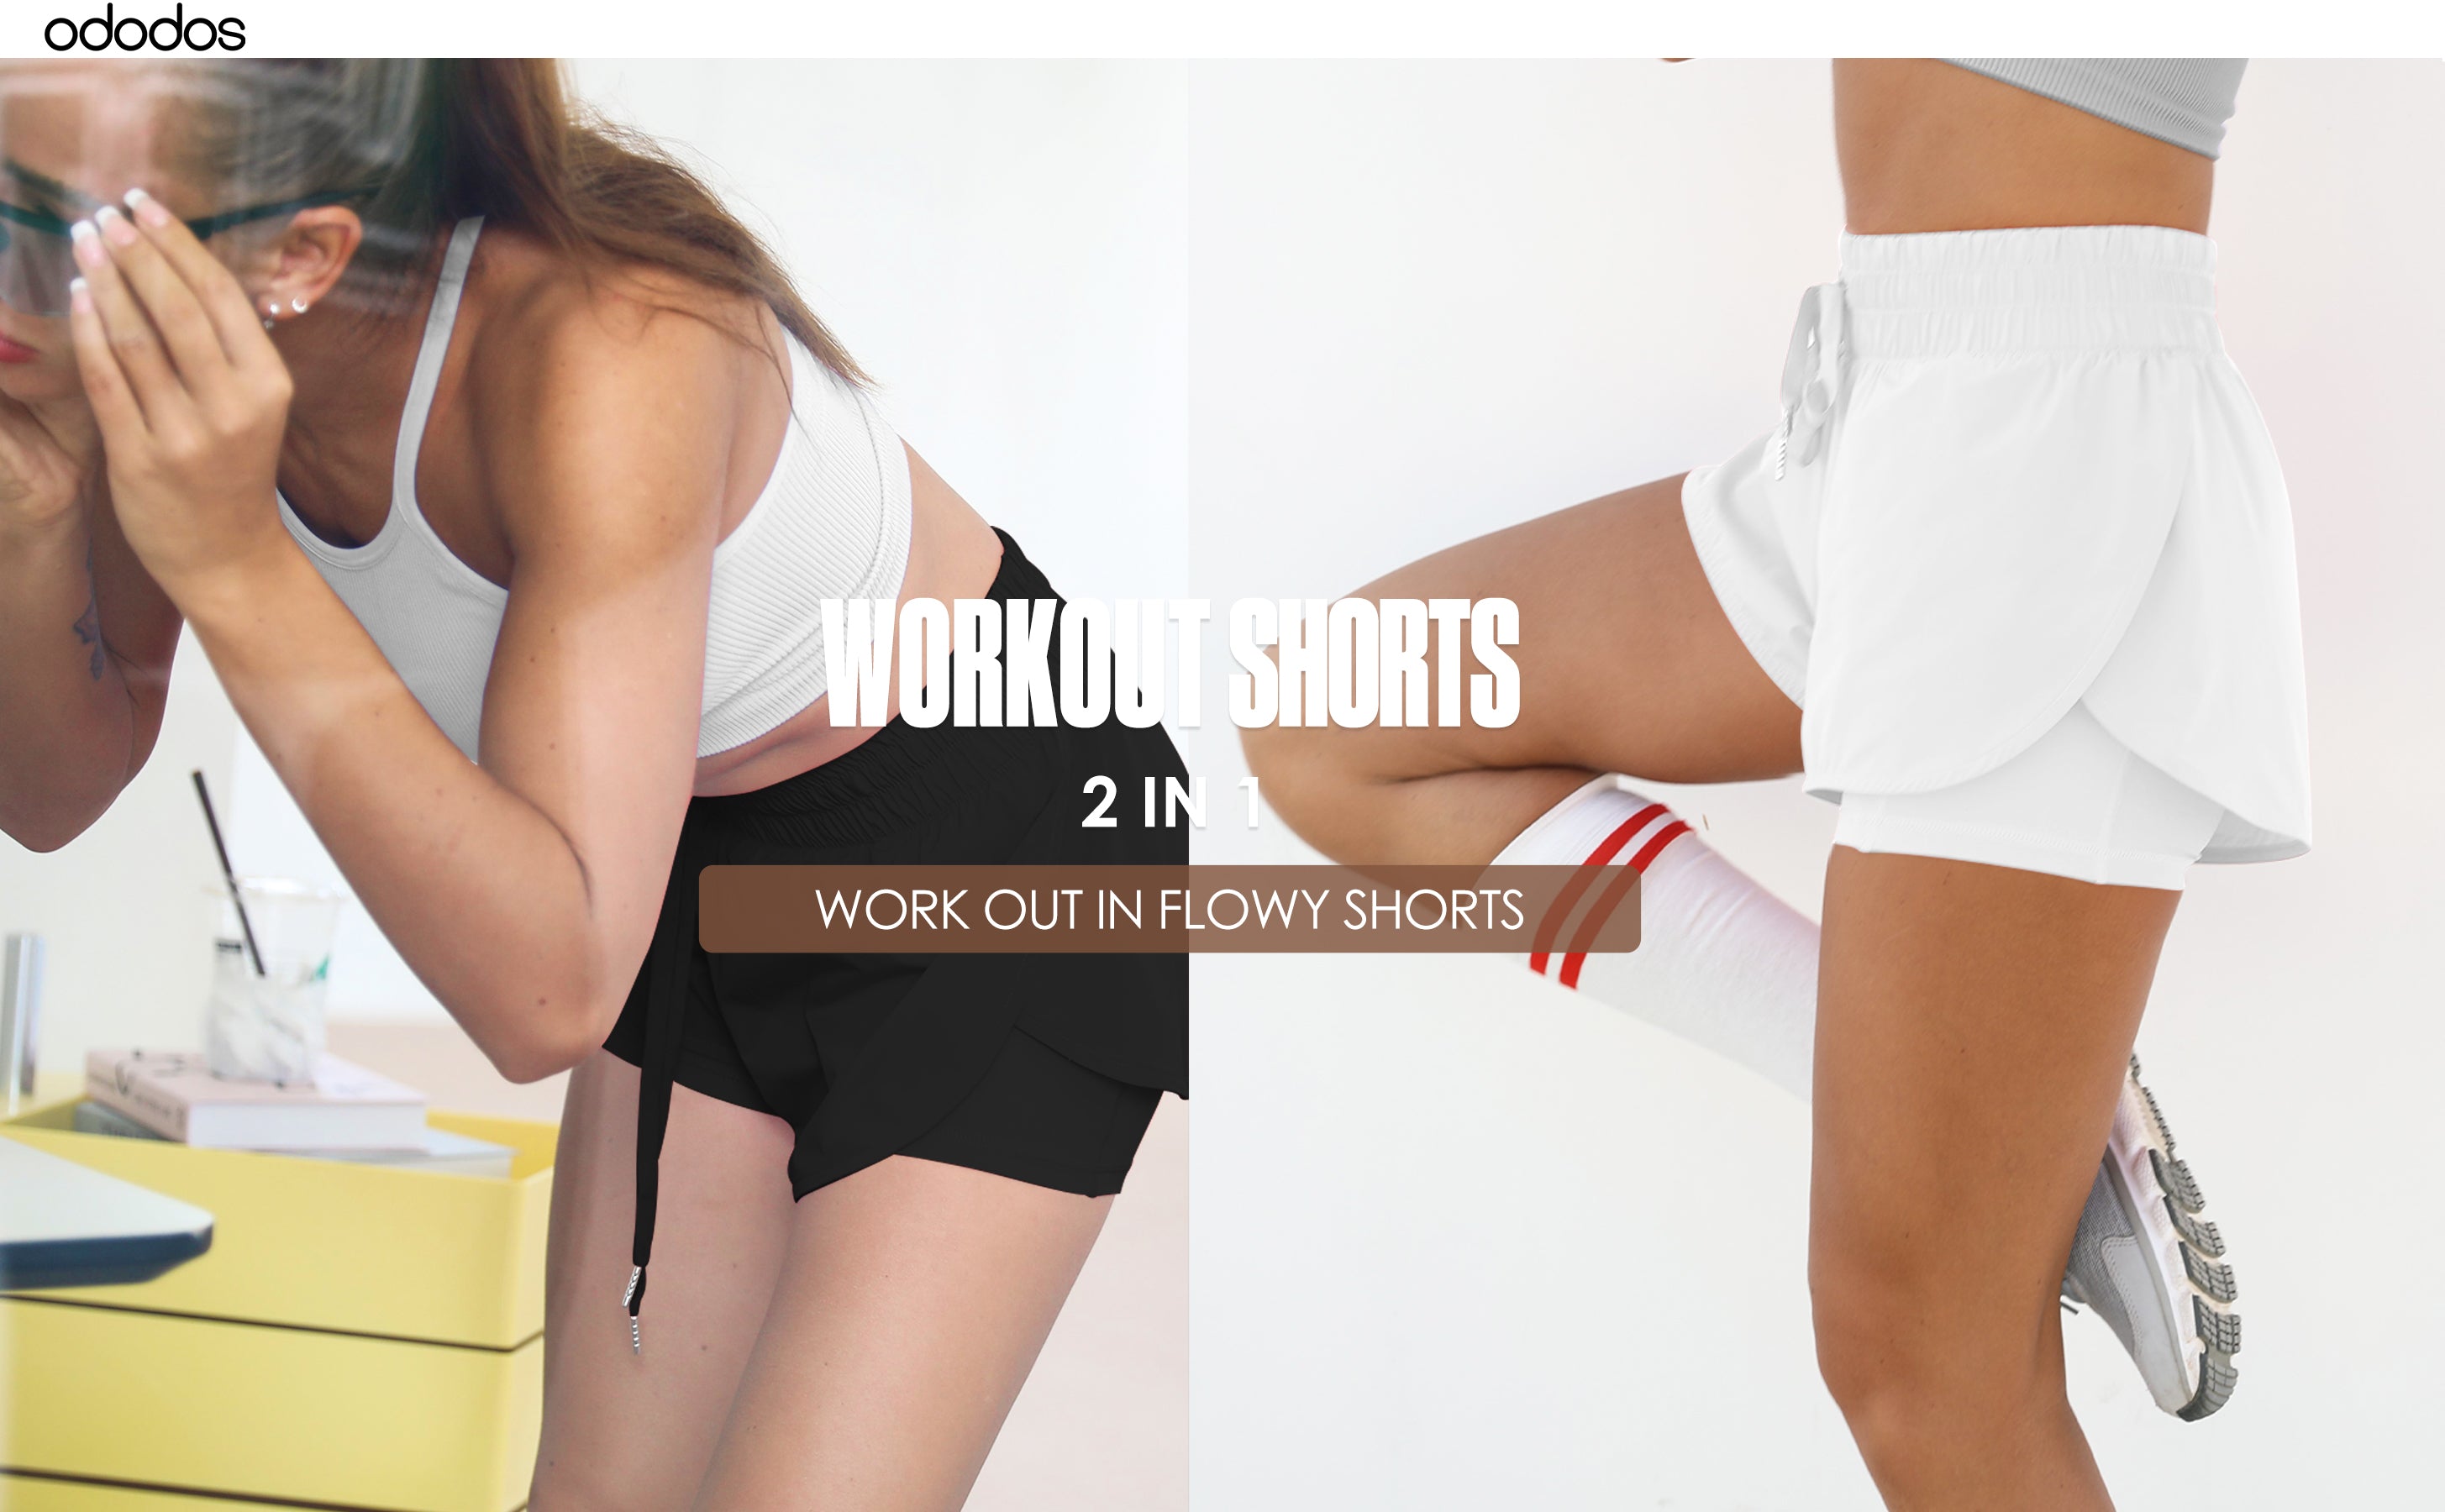 Ododos 2 in 1 Workout Shorts with Pockets